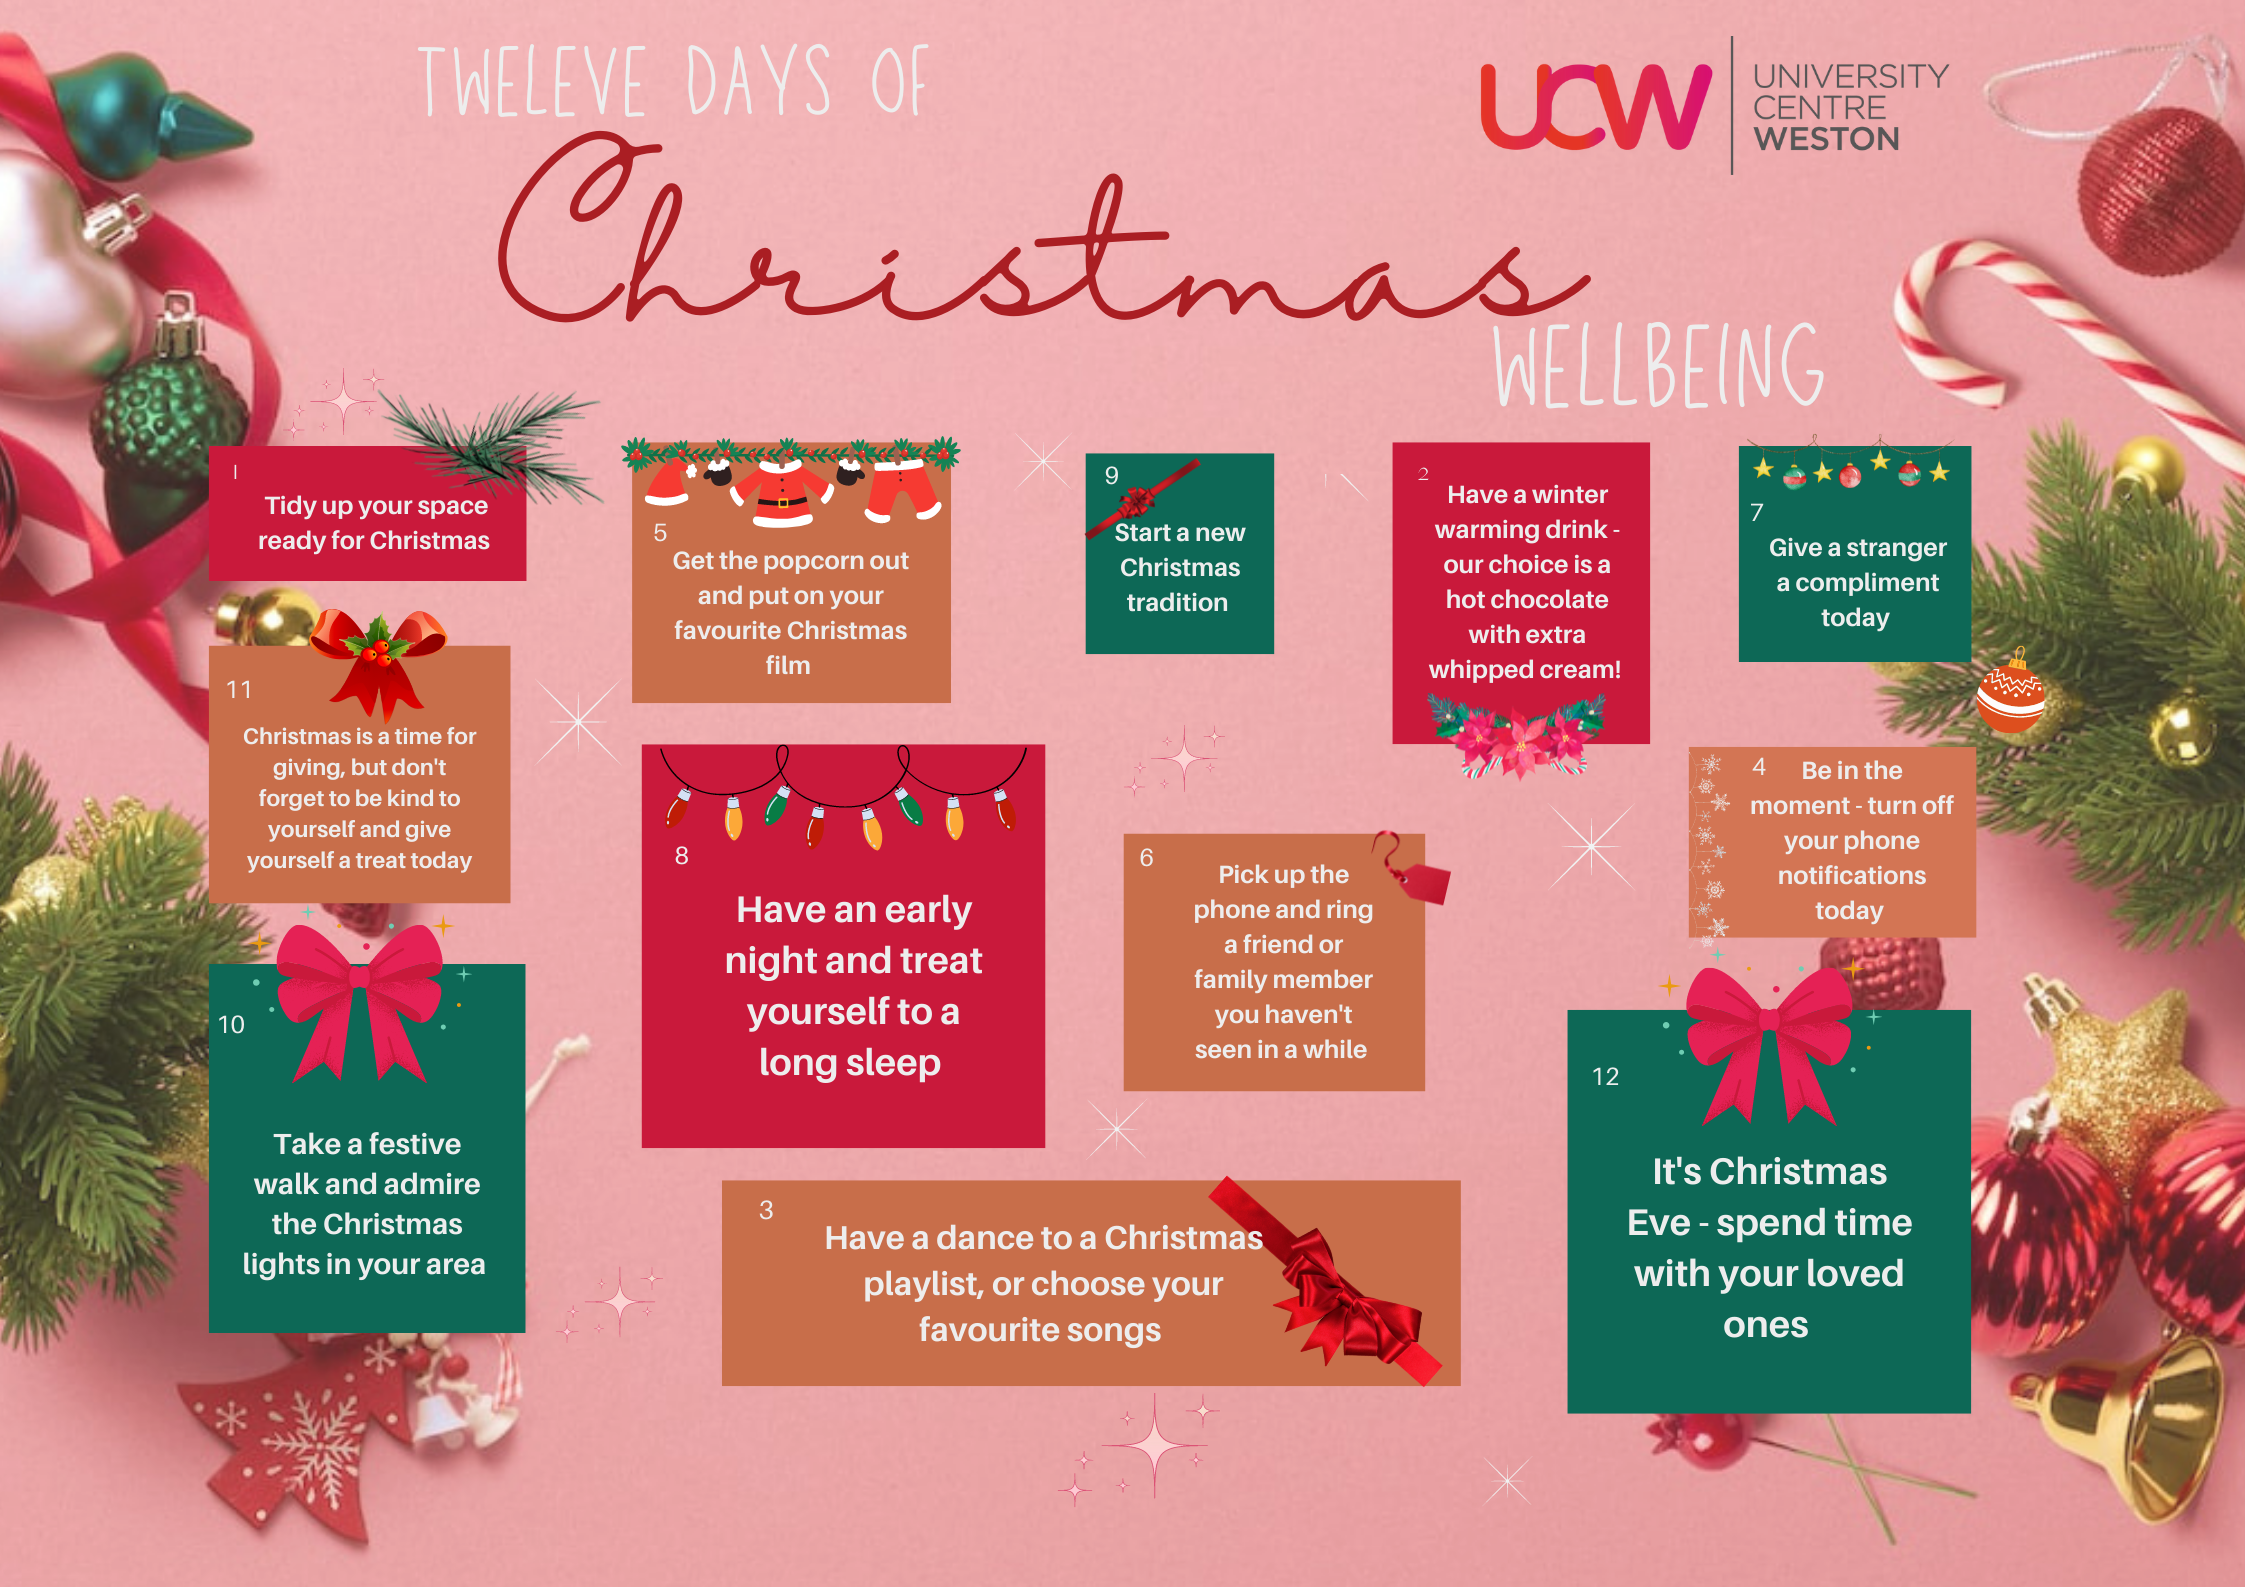 UCW 12 Days of Christmas Wellbeing